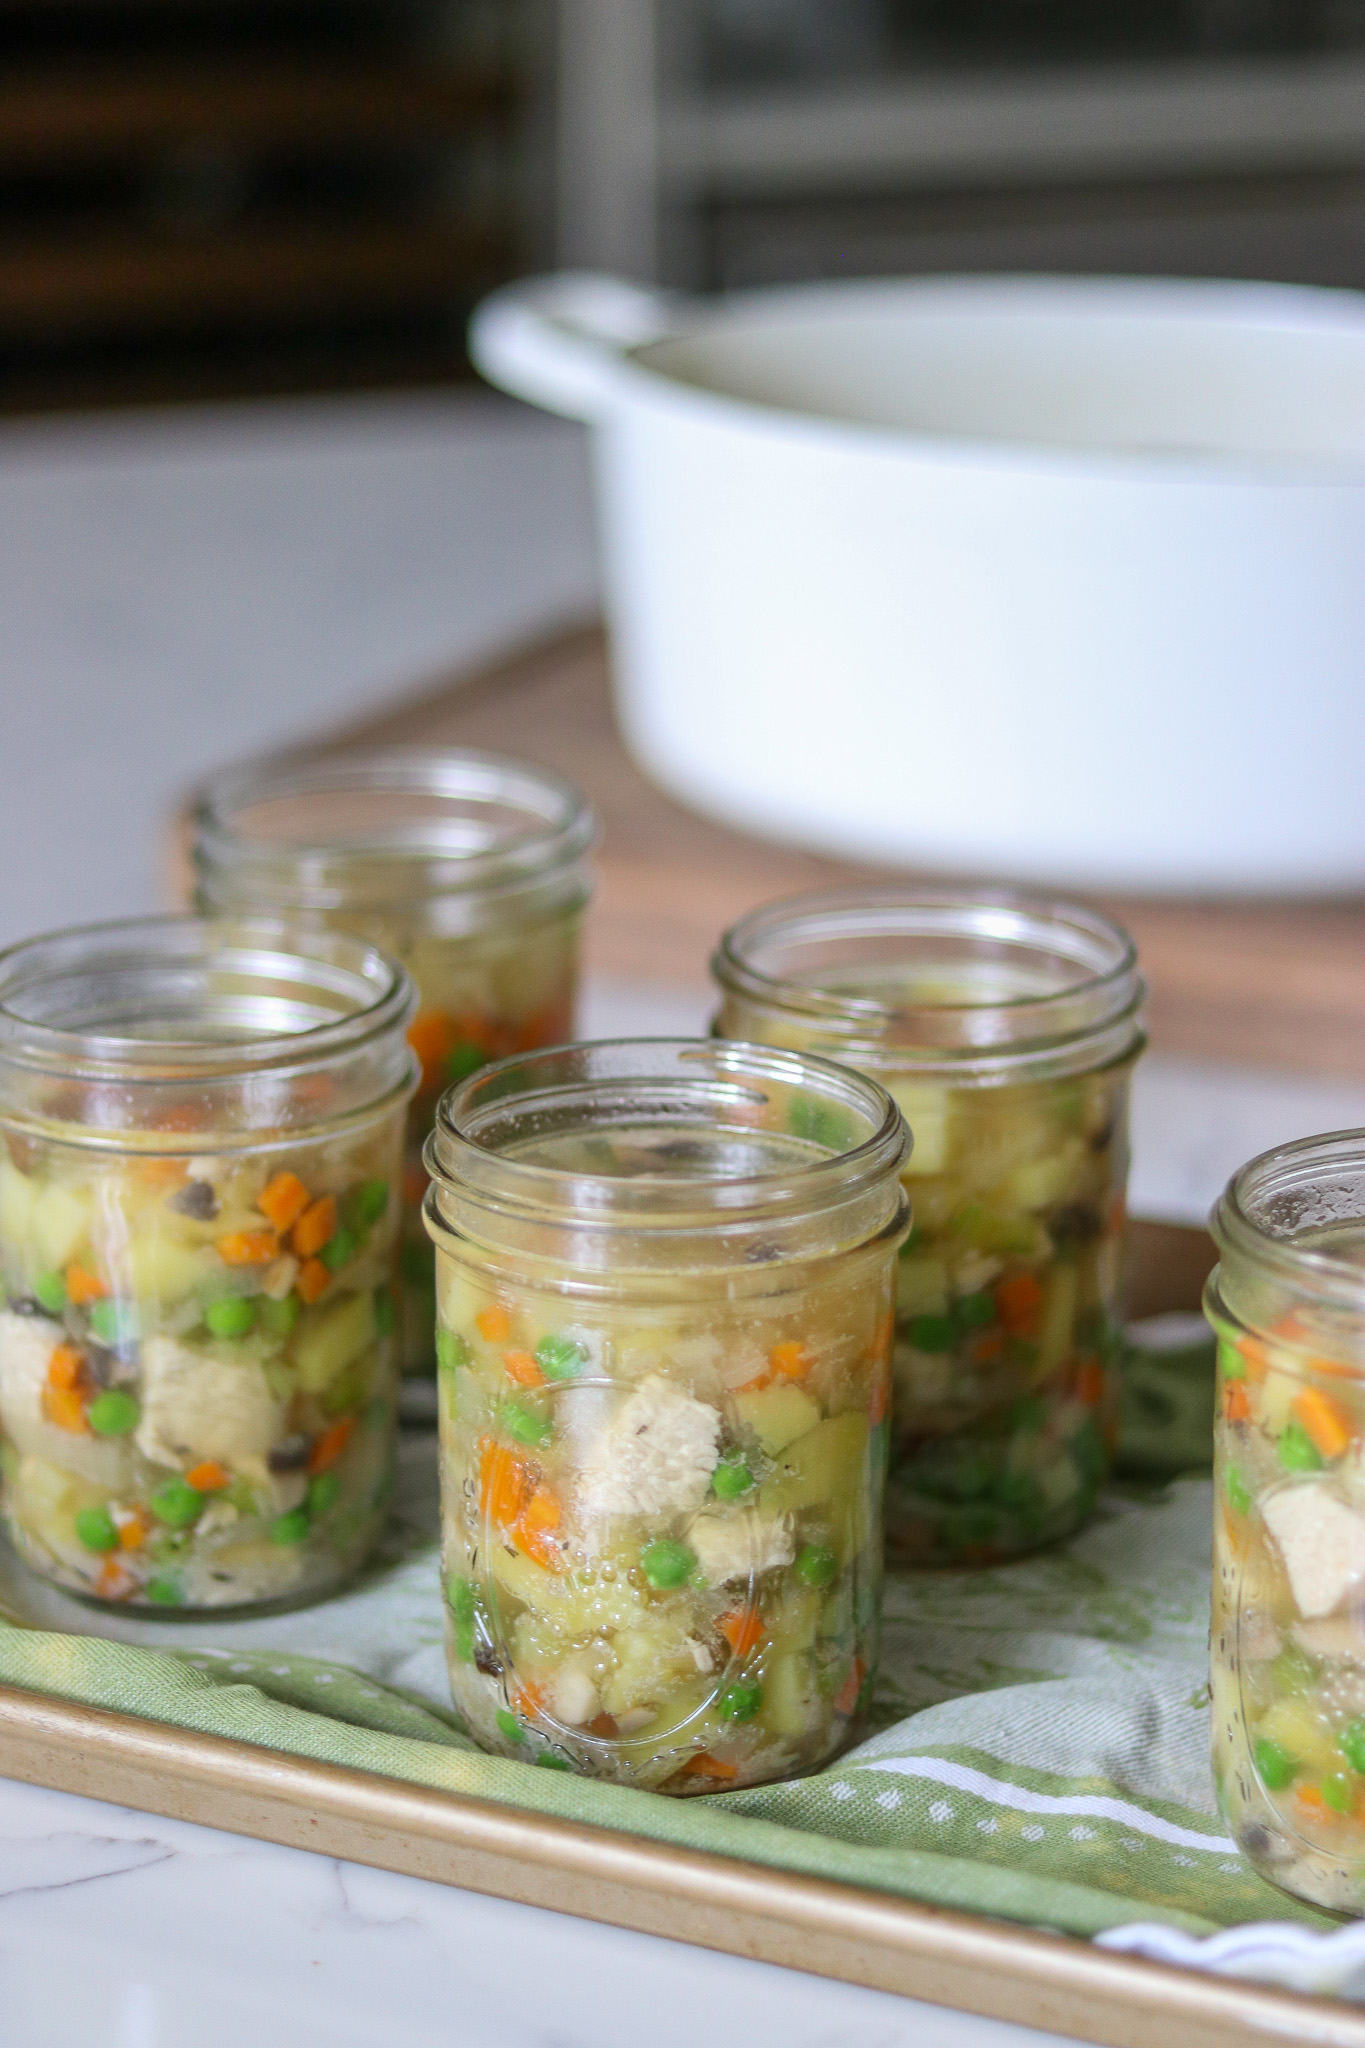 Jars with Chicken Pot Pie Filling